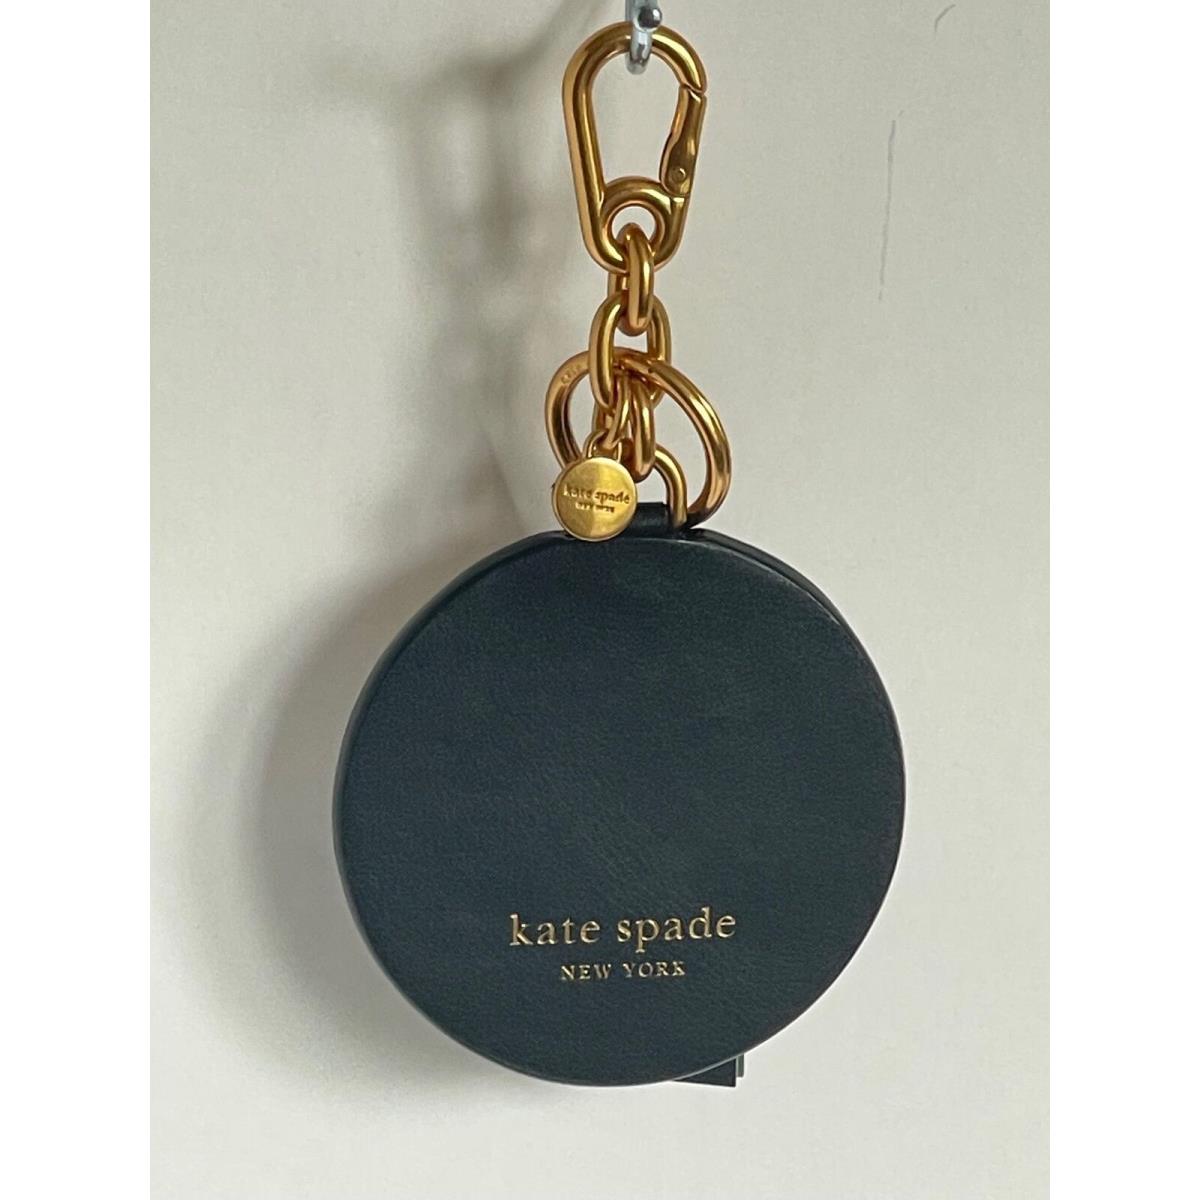 Kate Spade Fortune Favors Key Fob Keychain Bag Charm Leather Spinning Wheel